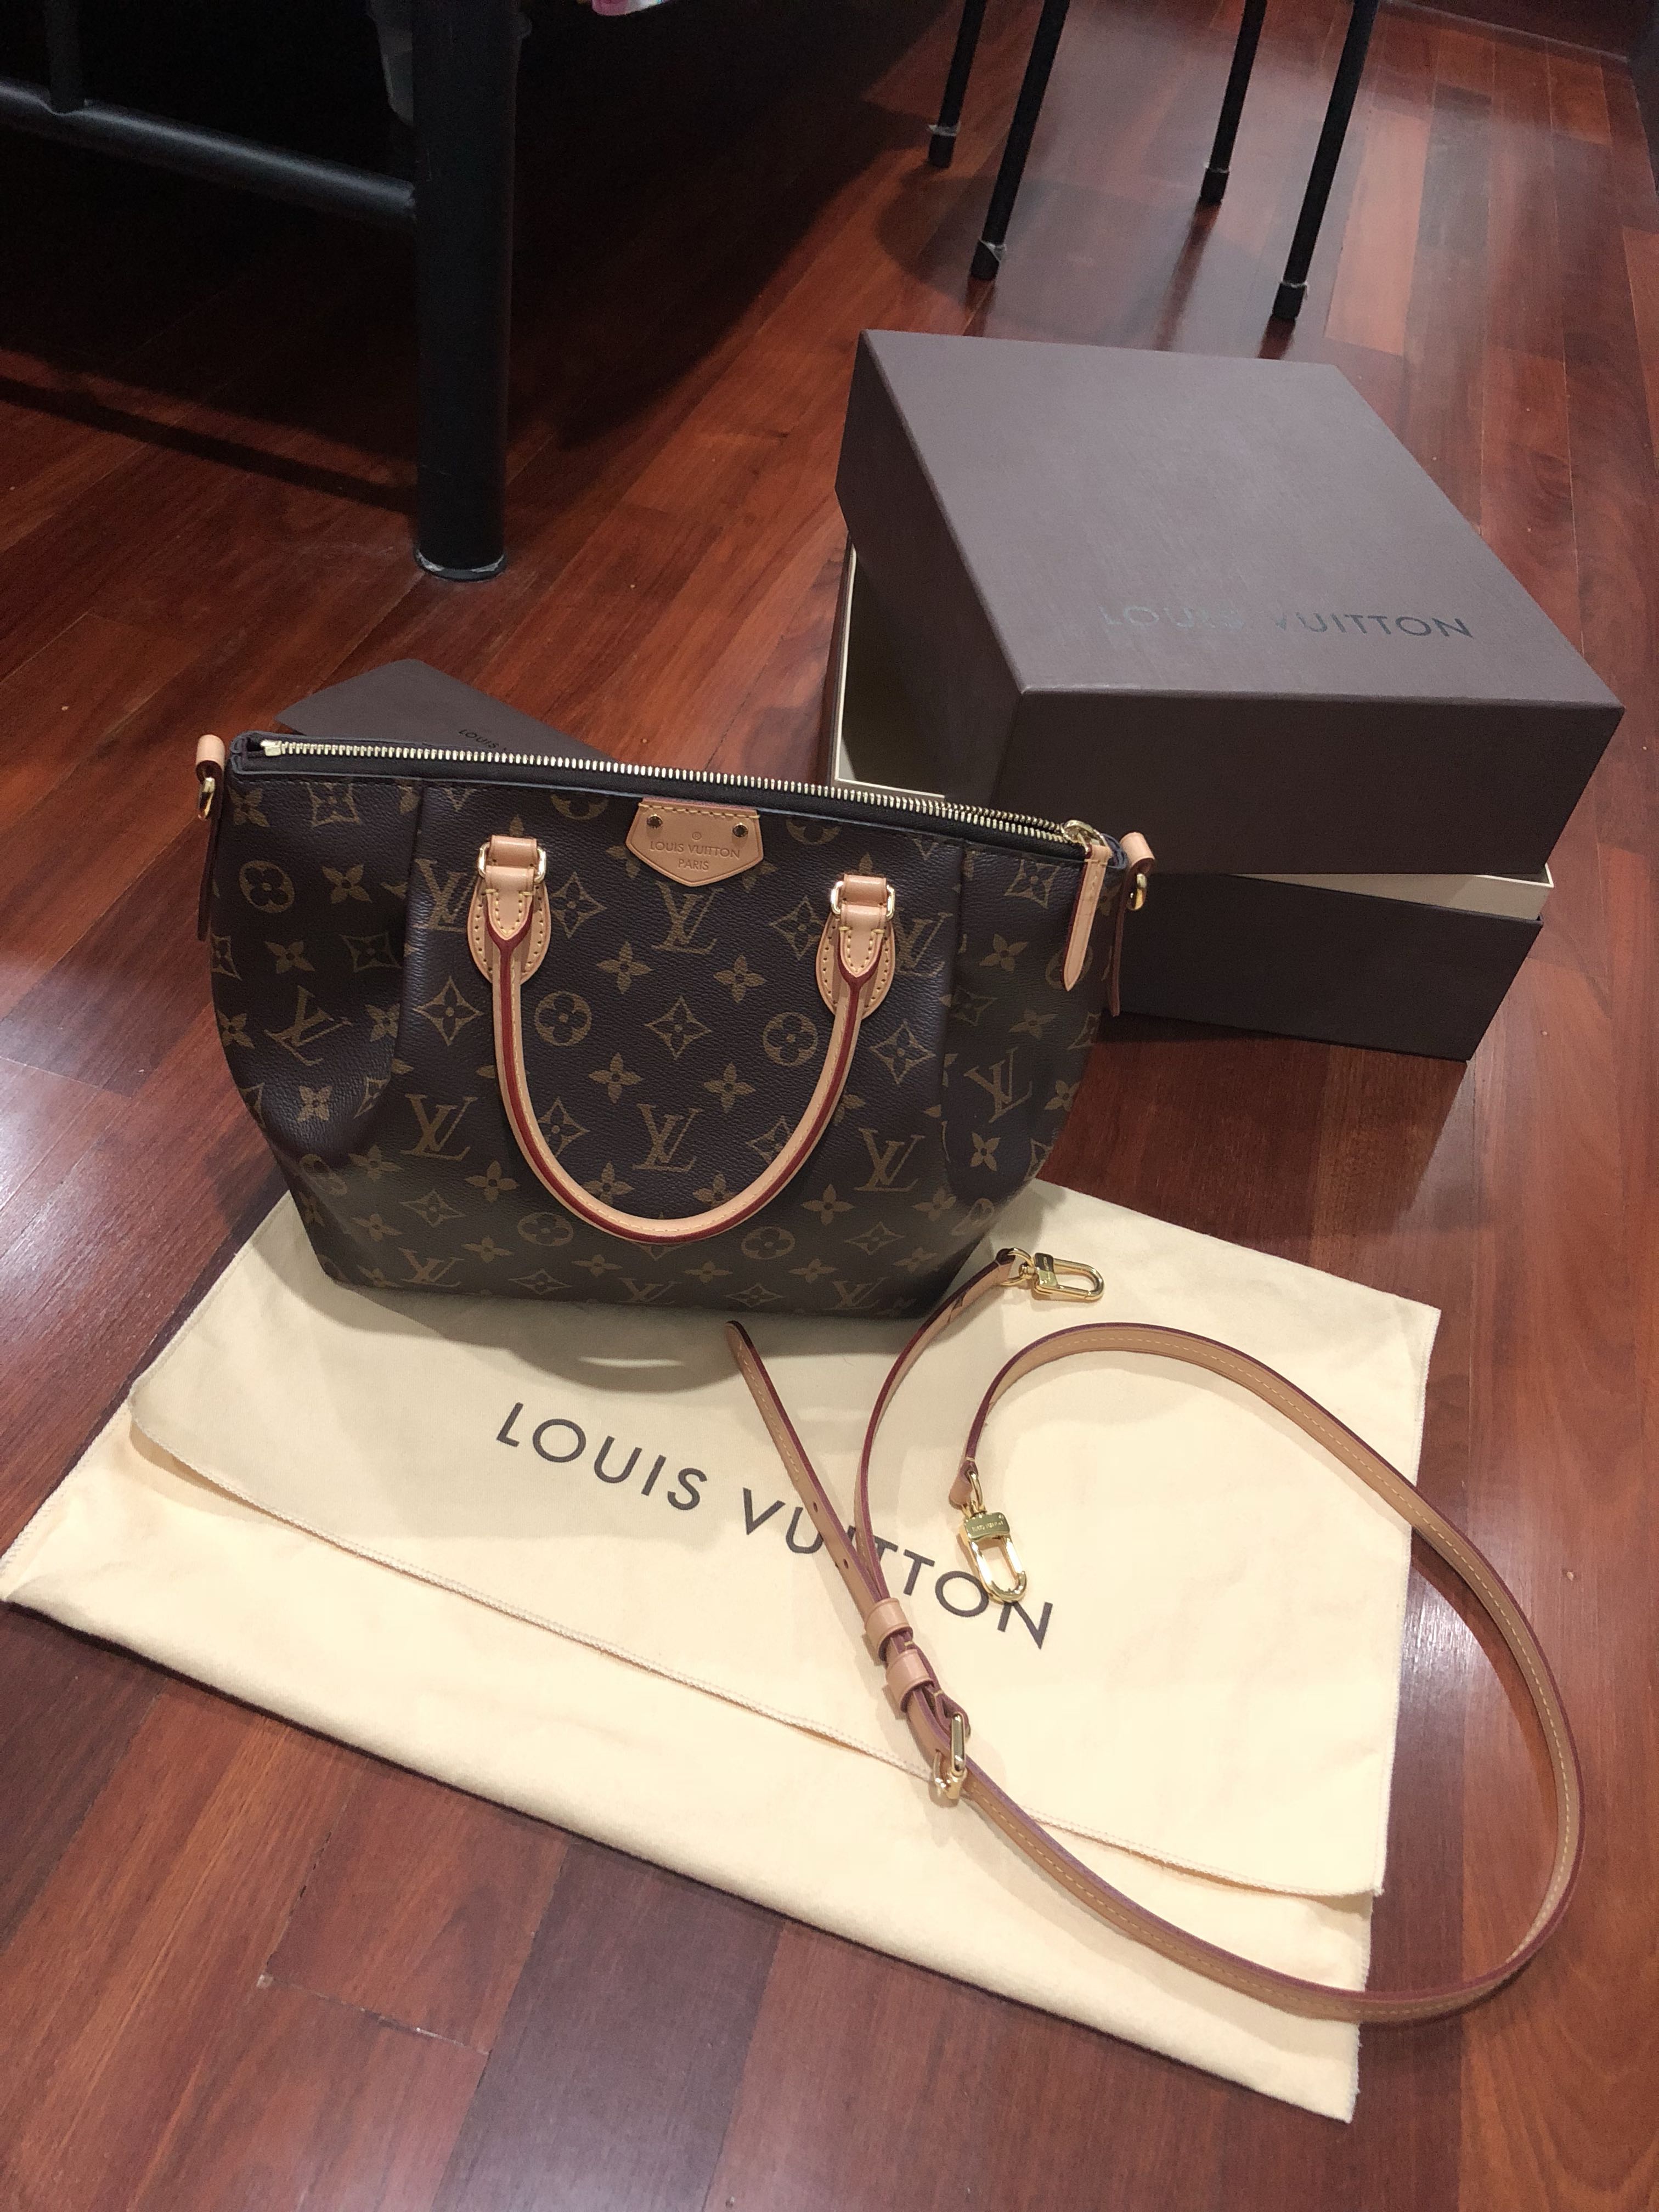 LOUIS VUITTON LOUIS VUITTON Turenne PM Shoulder Bag M59281 Epi leather  Brown Camel SHW used M59281｜Product Code：2101216150867｜BRAND OFF Online  Store